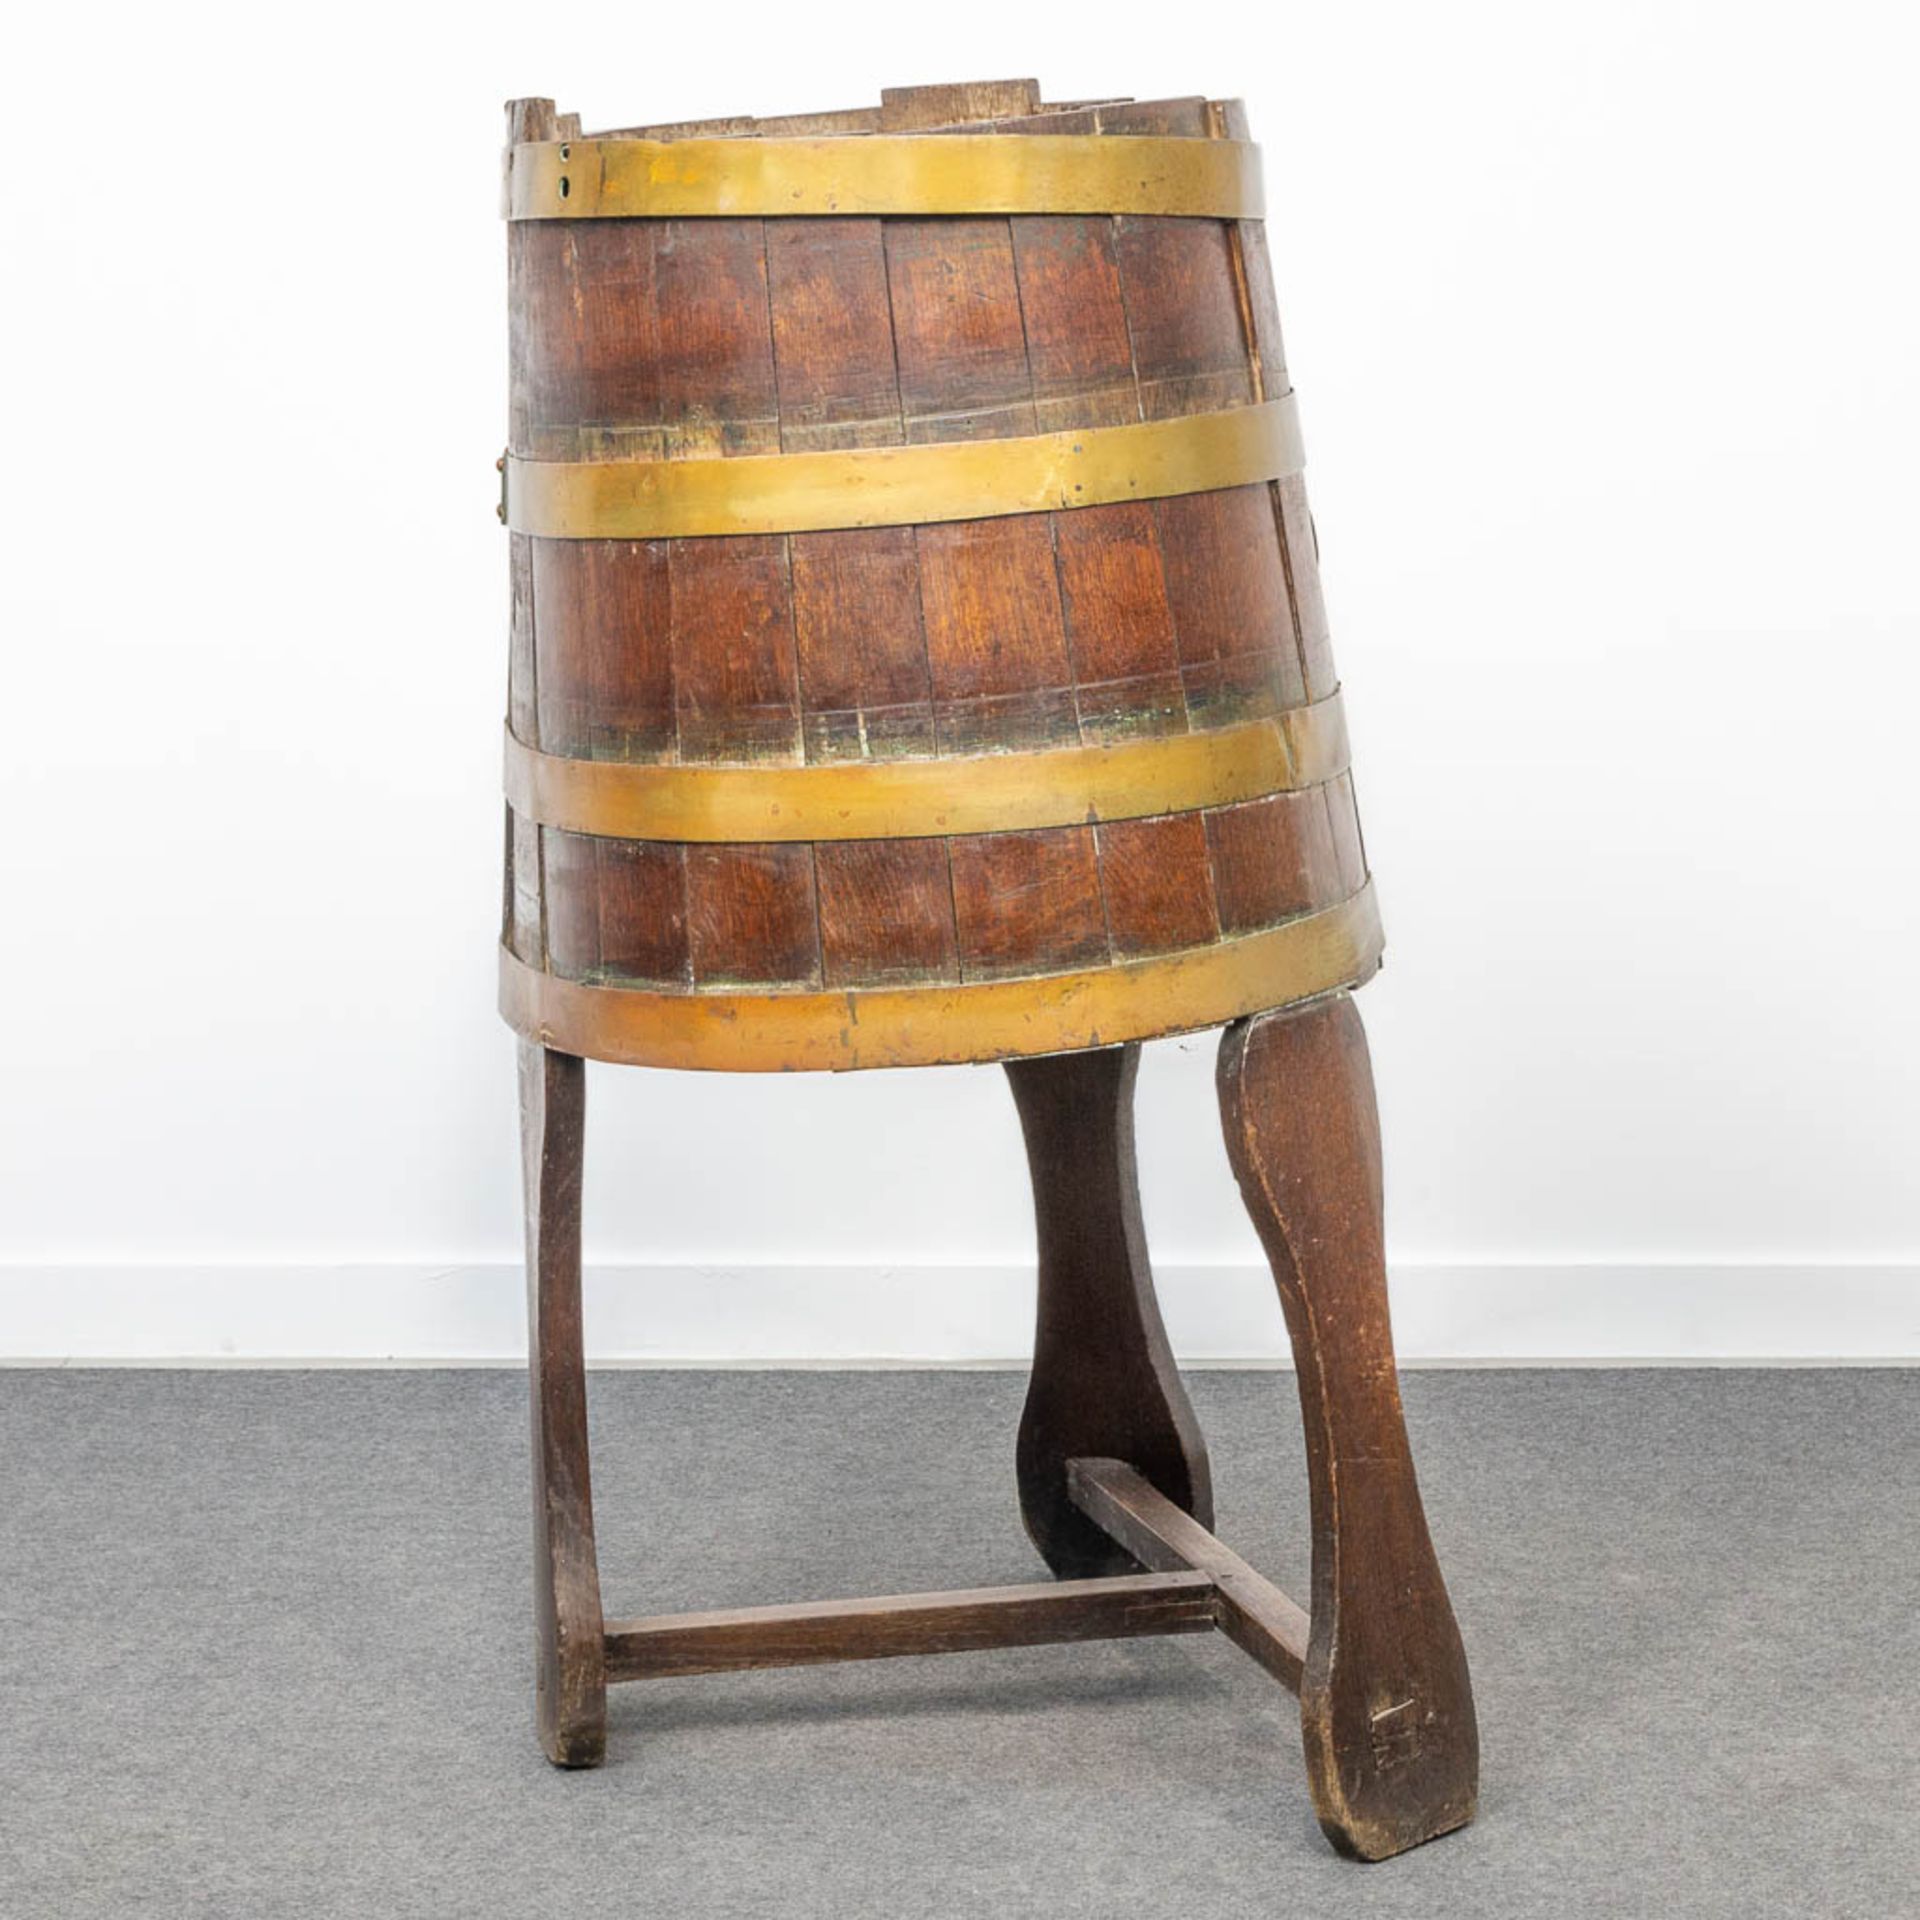 A churn standing on a base, made of oak and brass. (61 x 51 x 105 cm) - Image 3 of 6